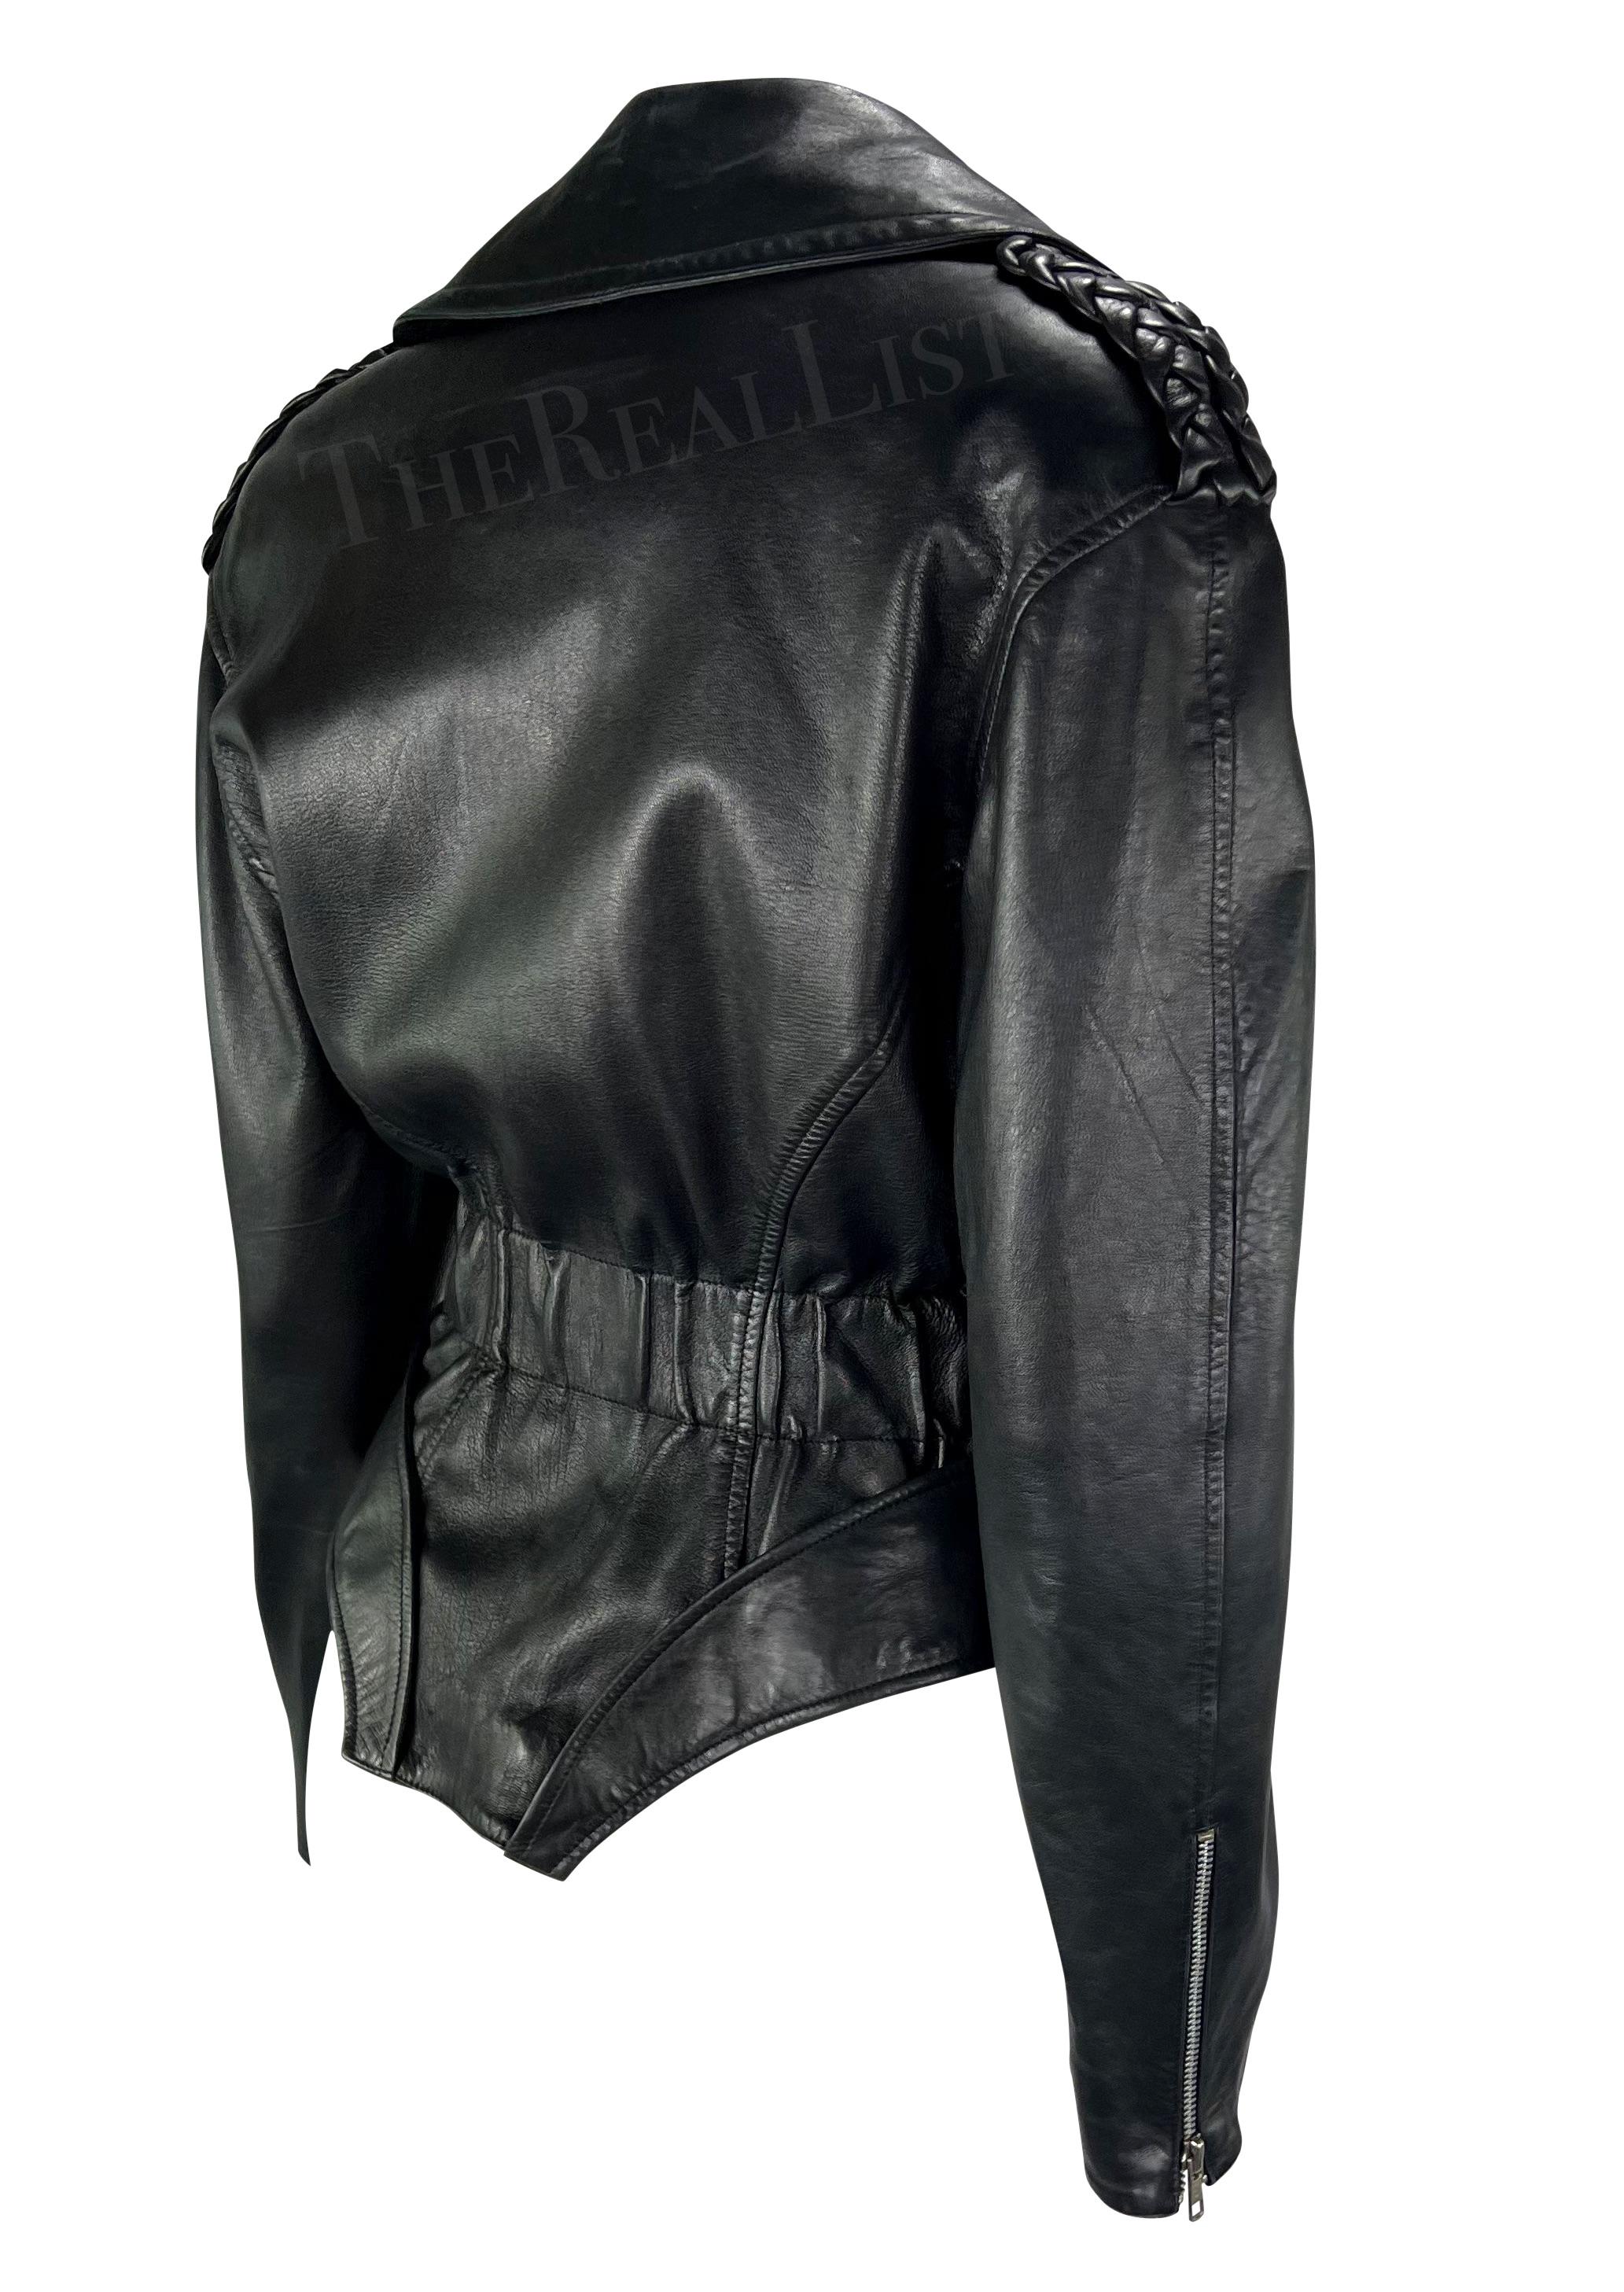 F/W 1988 Thierry Mugler 'Les Infernales' Hip Cutout Leather Moto Biker Jacket For Sale 4